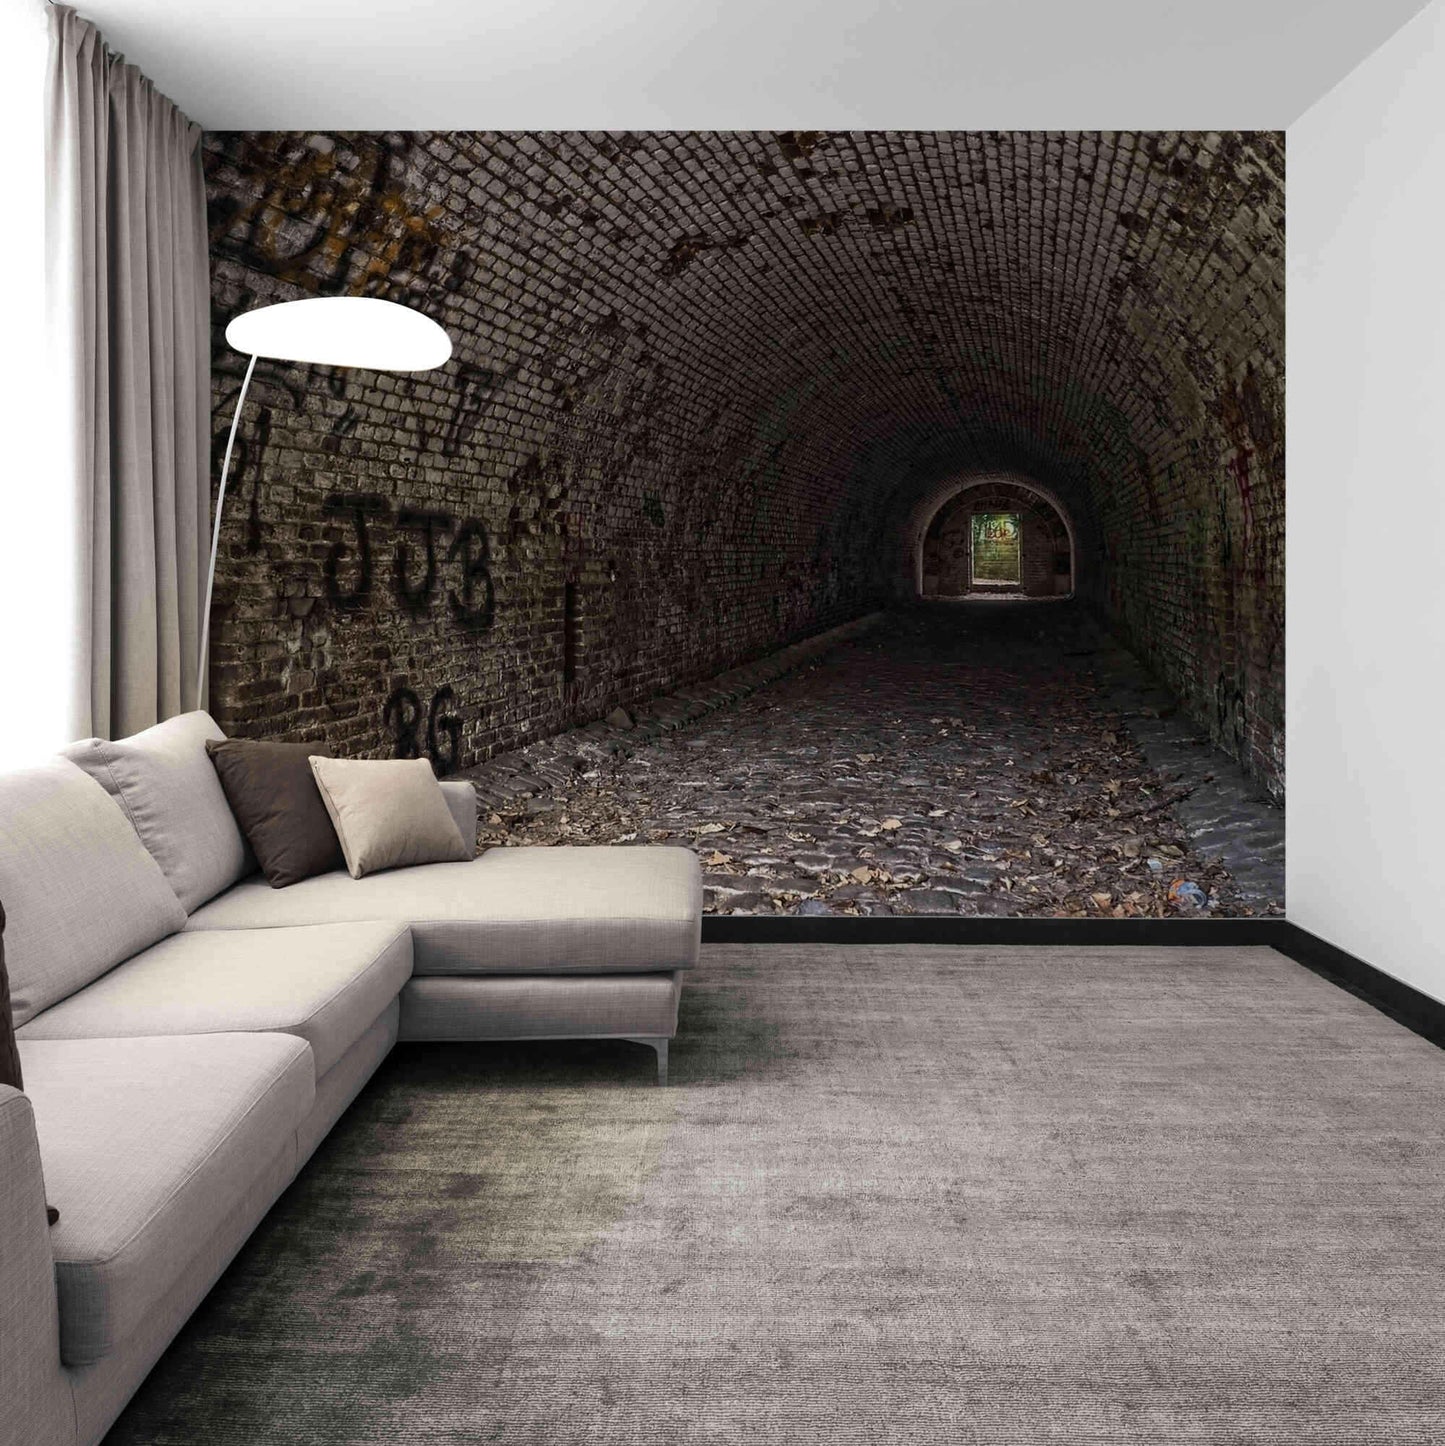 Perspective-Enhancing Tunnel Wallpaper